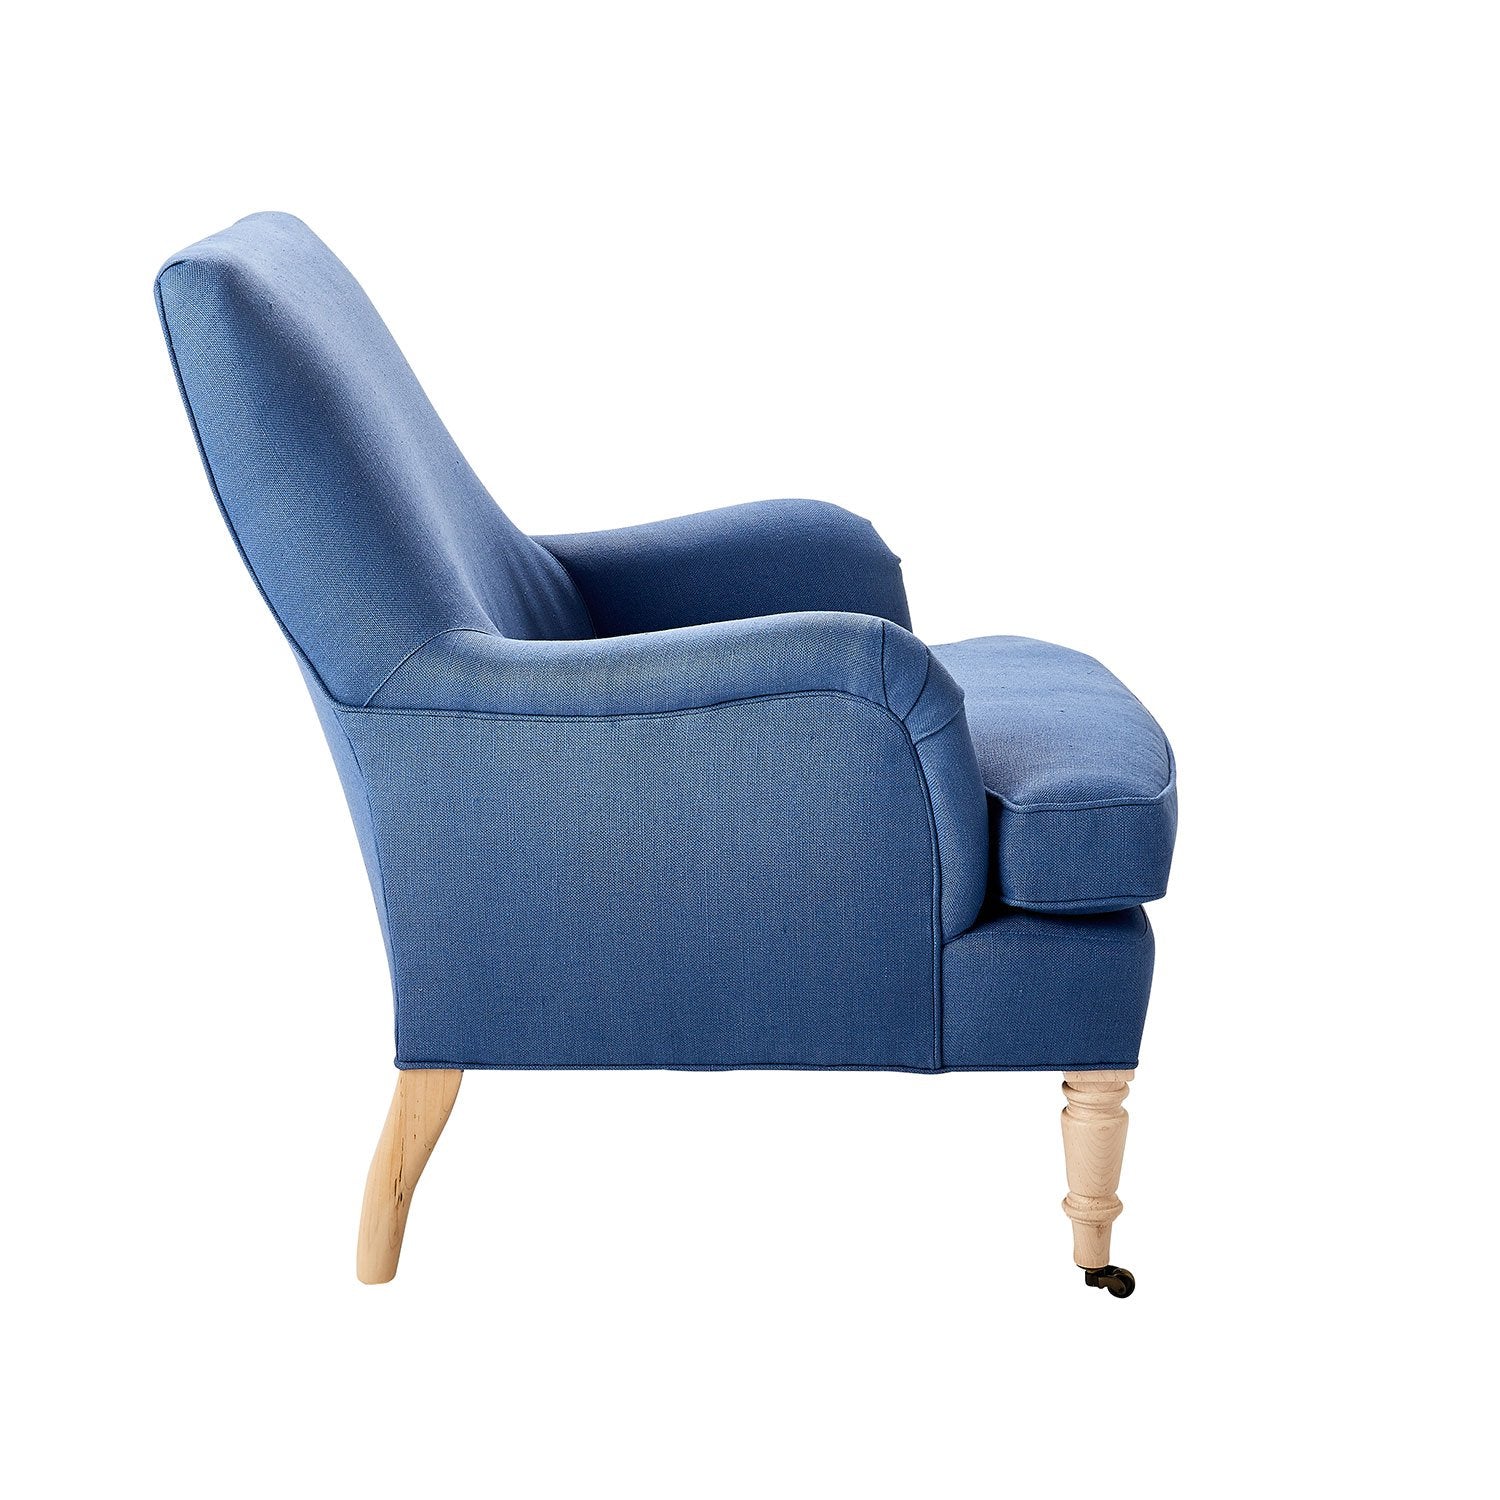 Side of Blueberry Blue Carter Chair